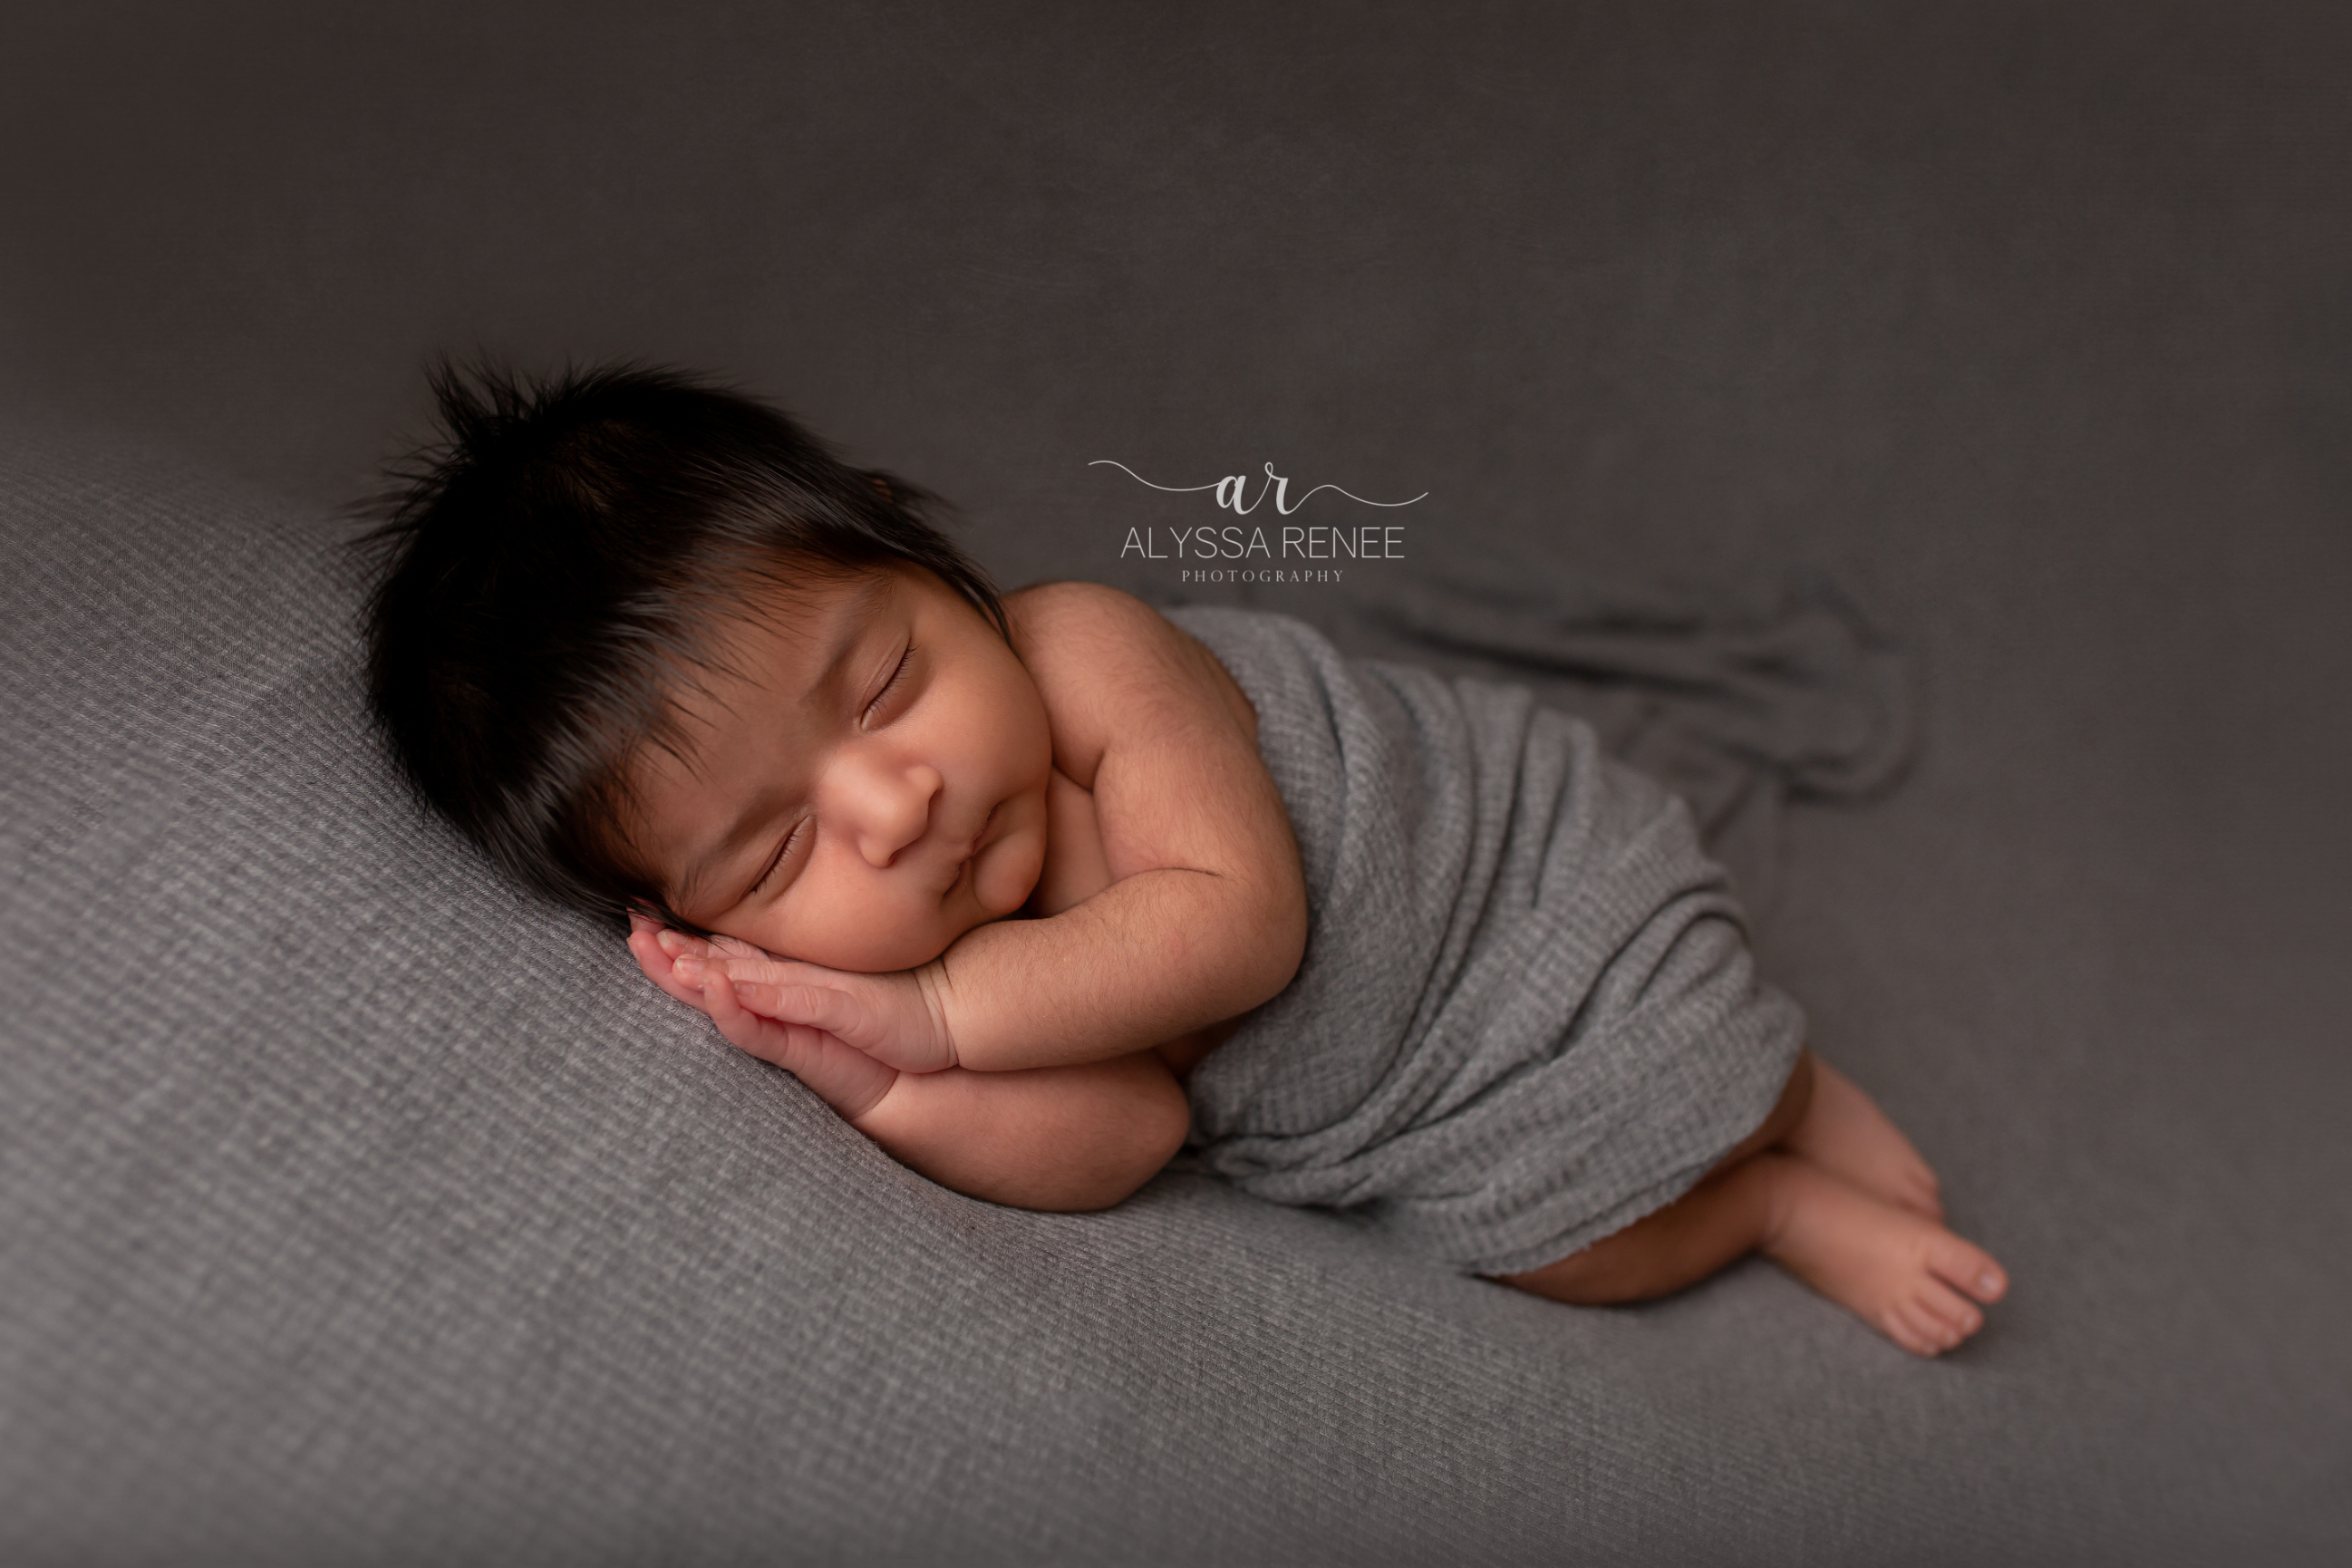 Beautiful artistic newborn portrait on gray blanket with loose swaddle